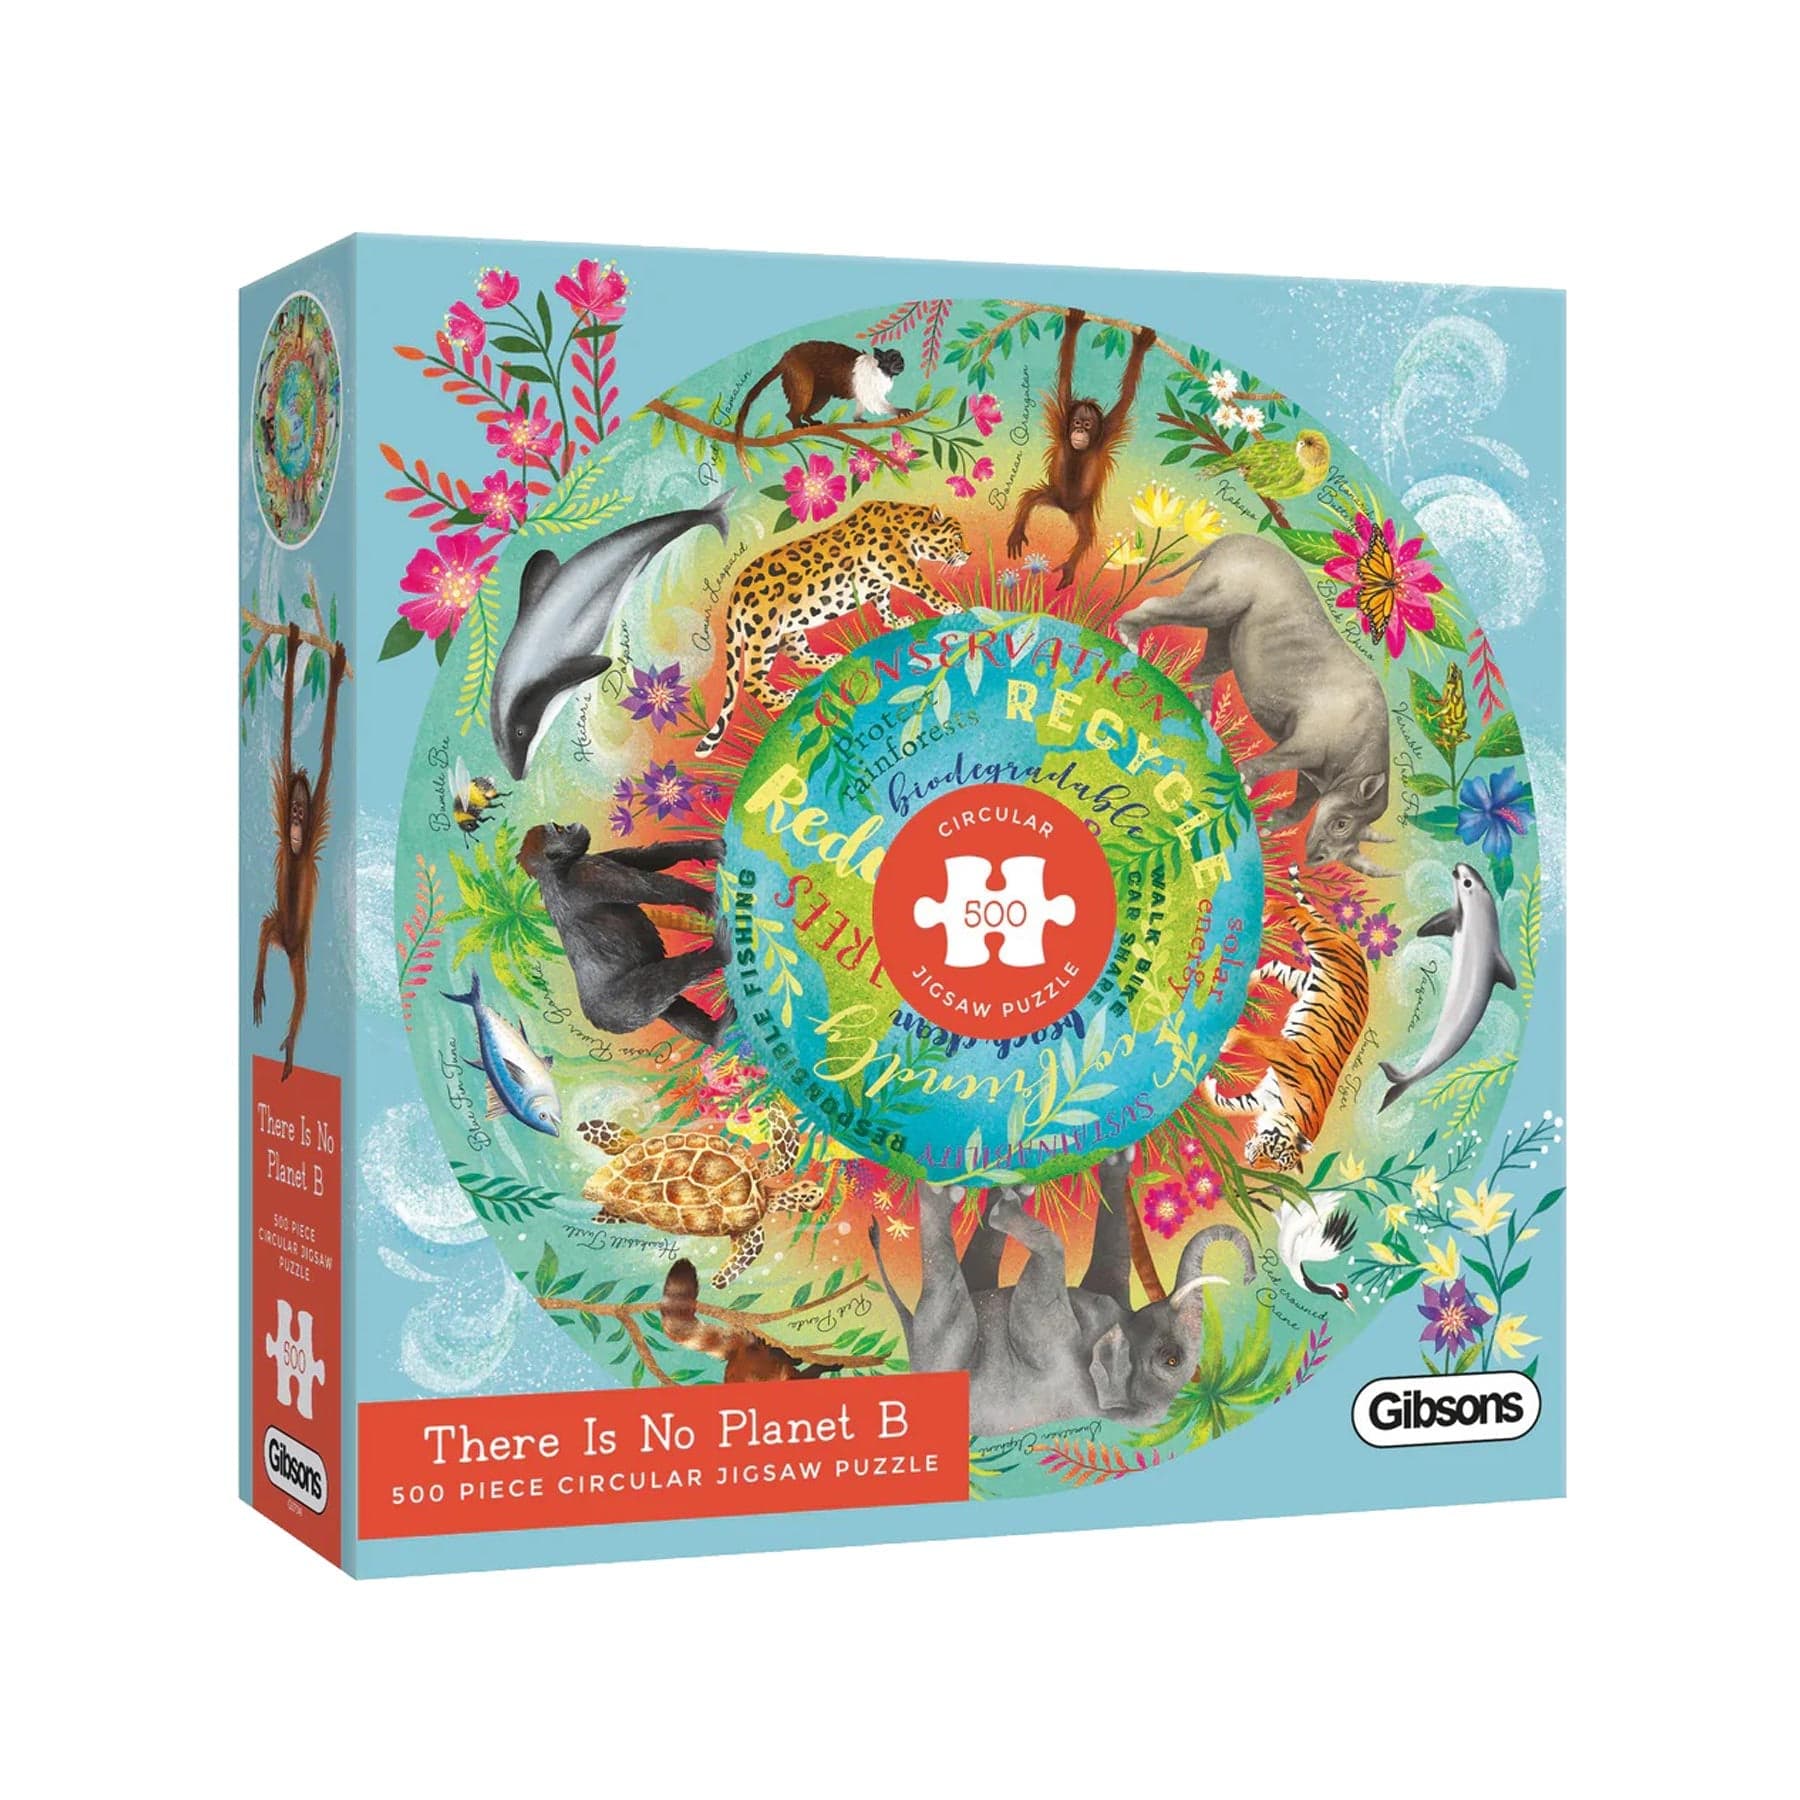 There is no planet b 500 piece jigsaw puzzle